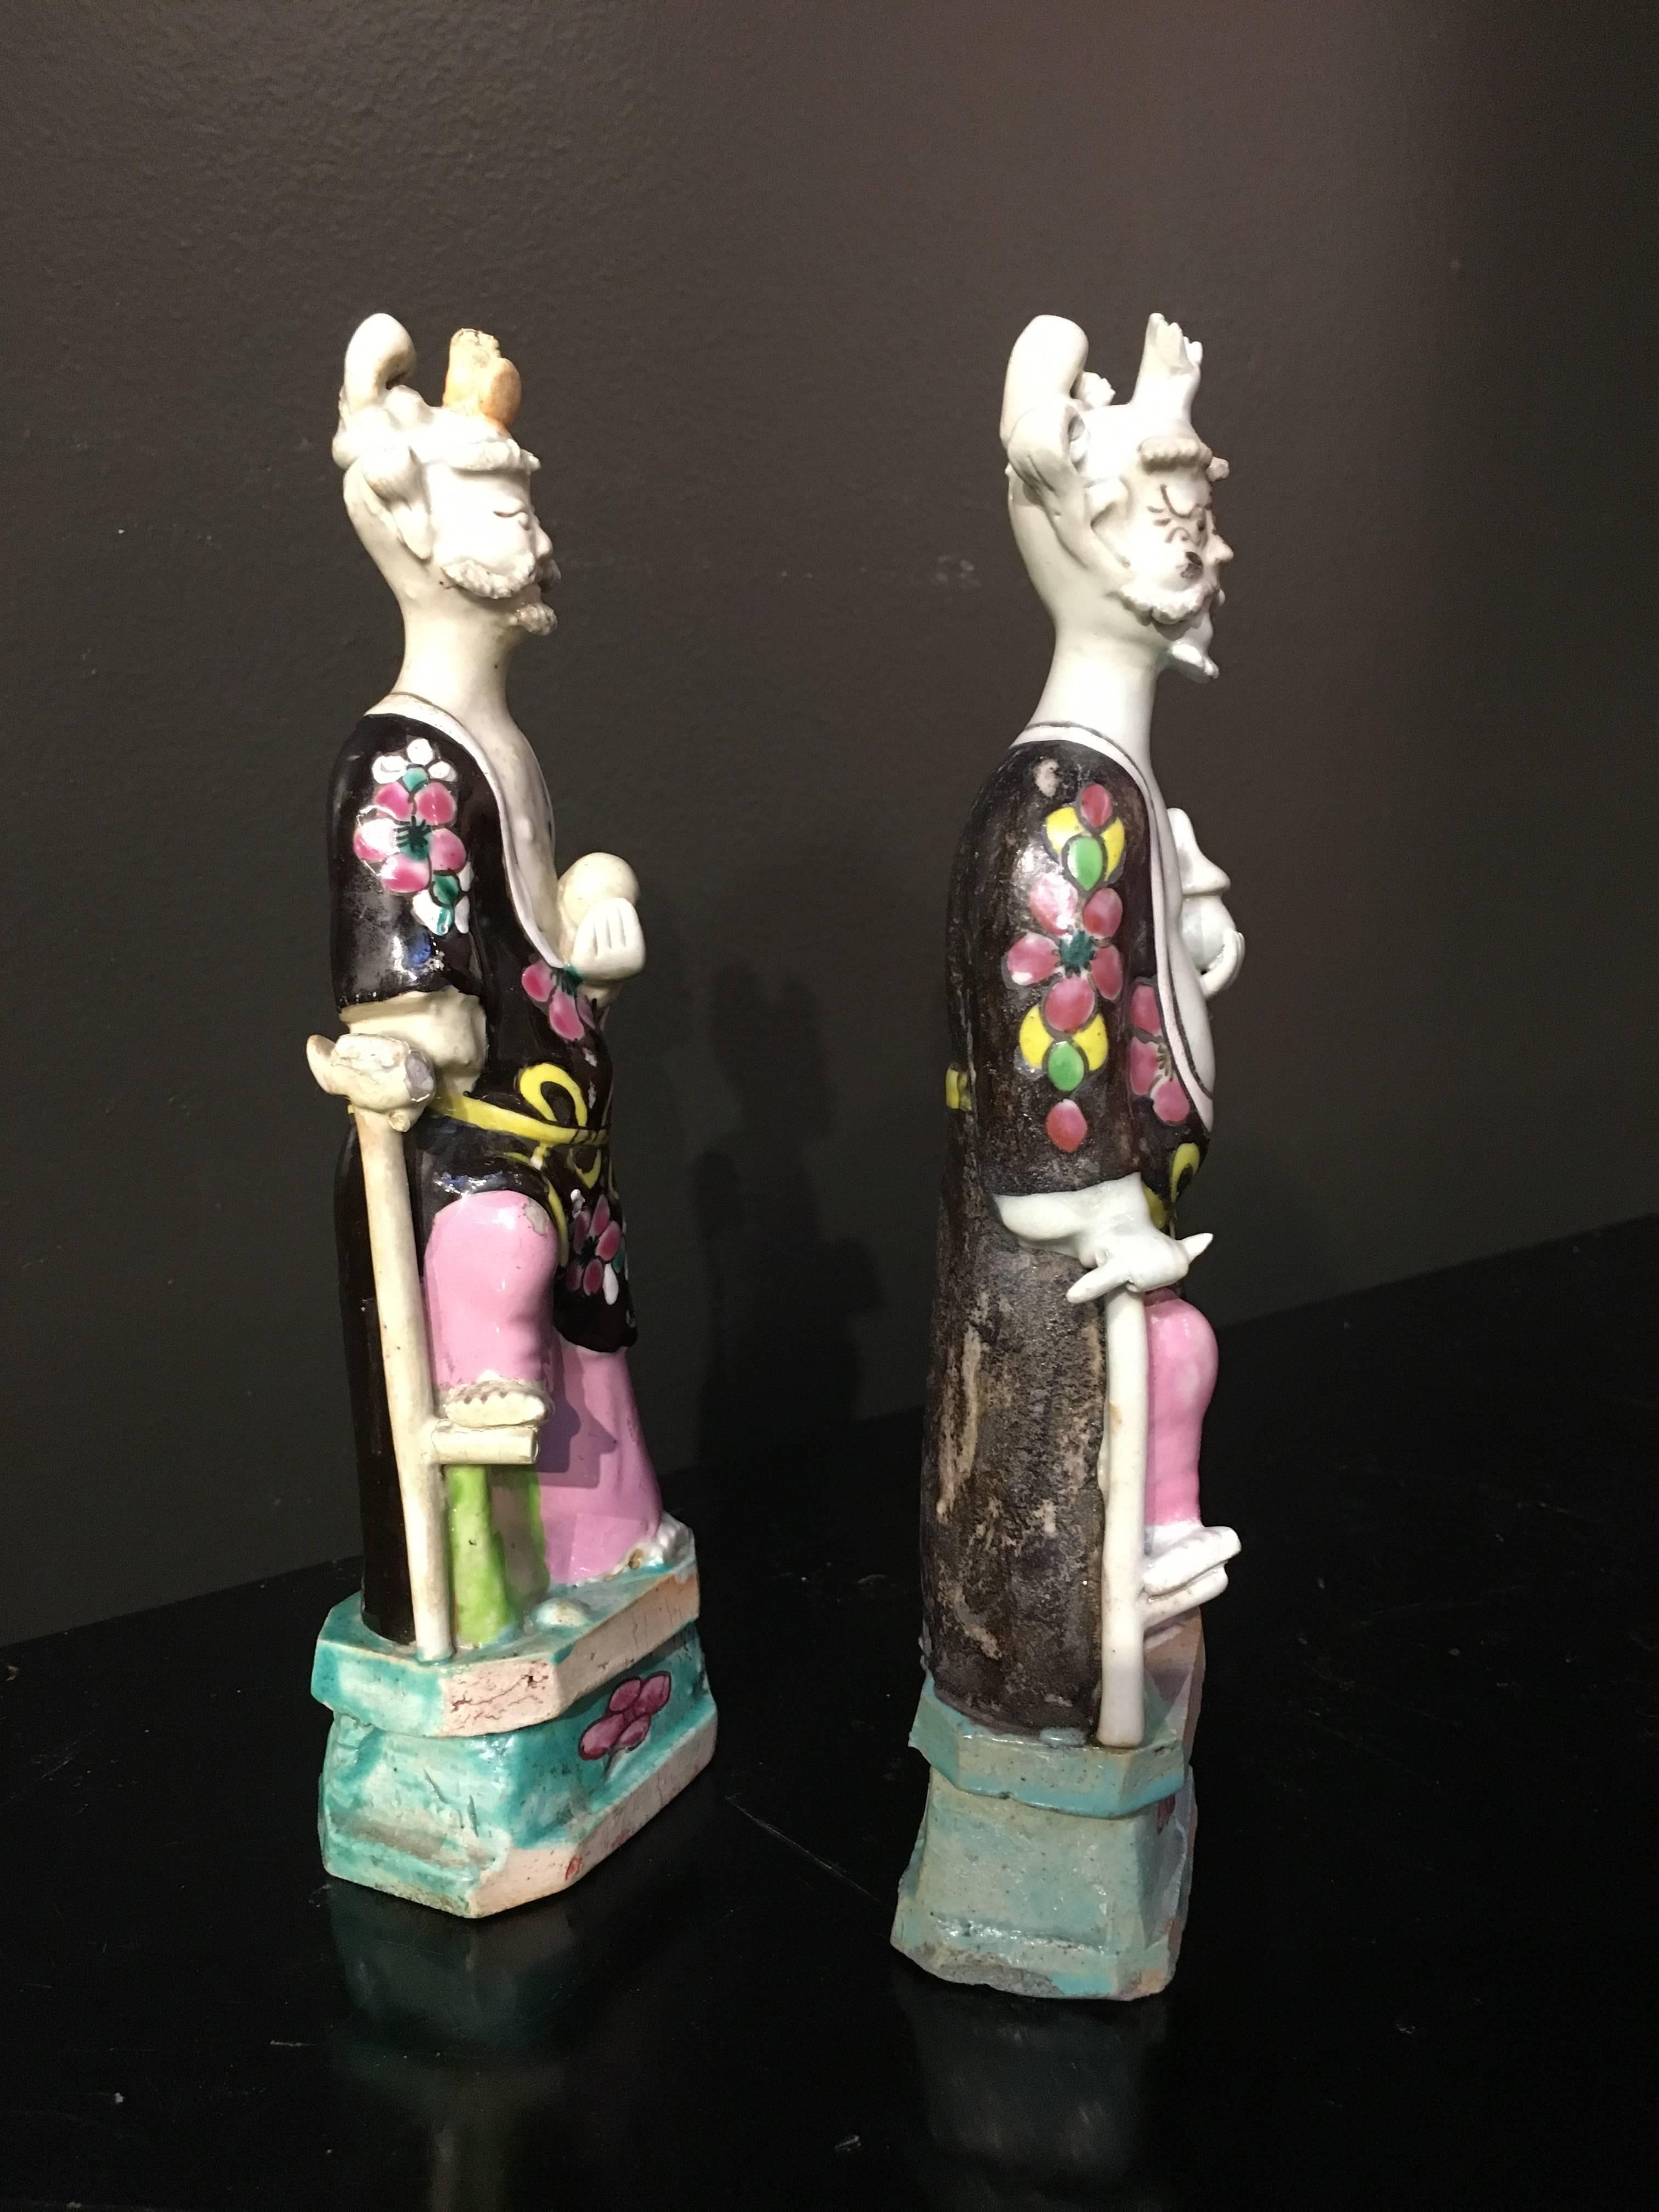 A near pair of Chinese export porcelain figures of the Taoist immortal Li Tieguai, Qing Dynasty, late 18th century, China. 

The Daoist Immortal Li Tieguai, on of the Eight Immortals, and known as 